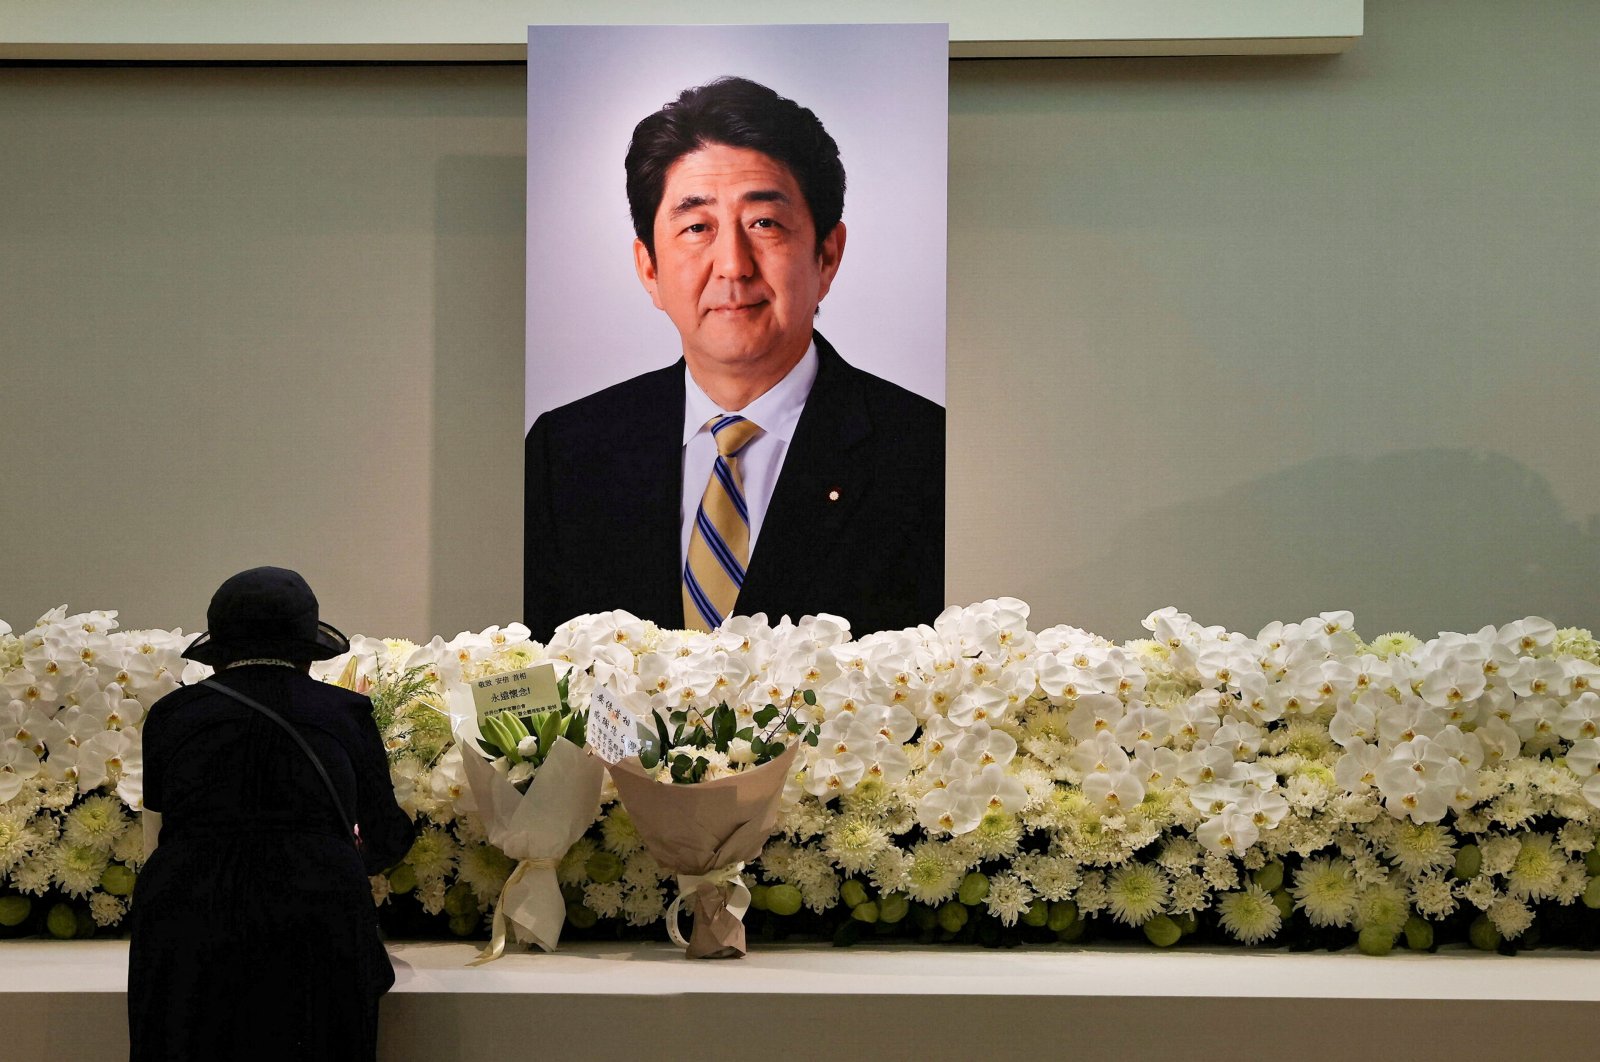 A mourner pays respects to late former Japanese Prime Minister Shinzo Abe, who was shot while campaigning for a parliamentary election, in Taipei, Taiwan, July 11, 2022.  (Reuters Photo)